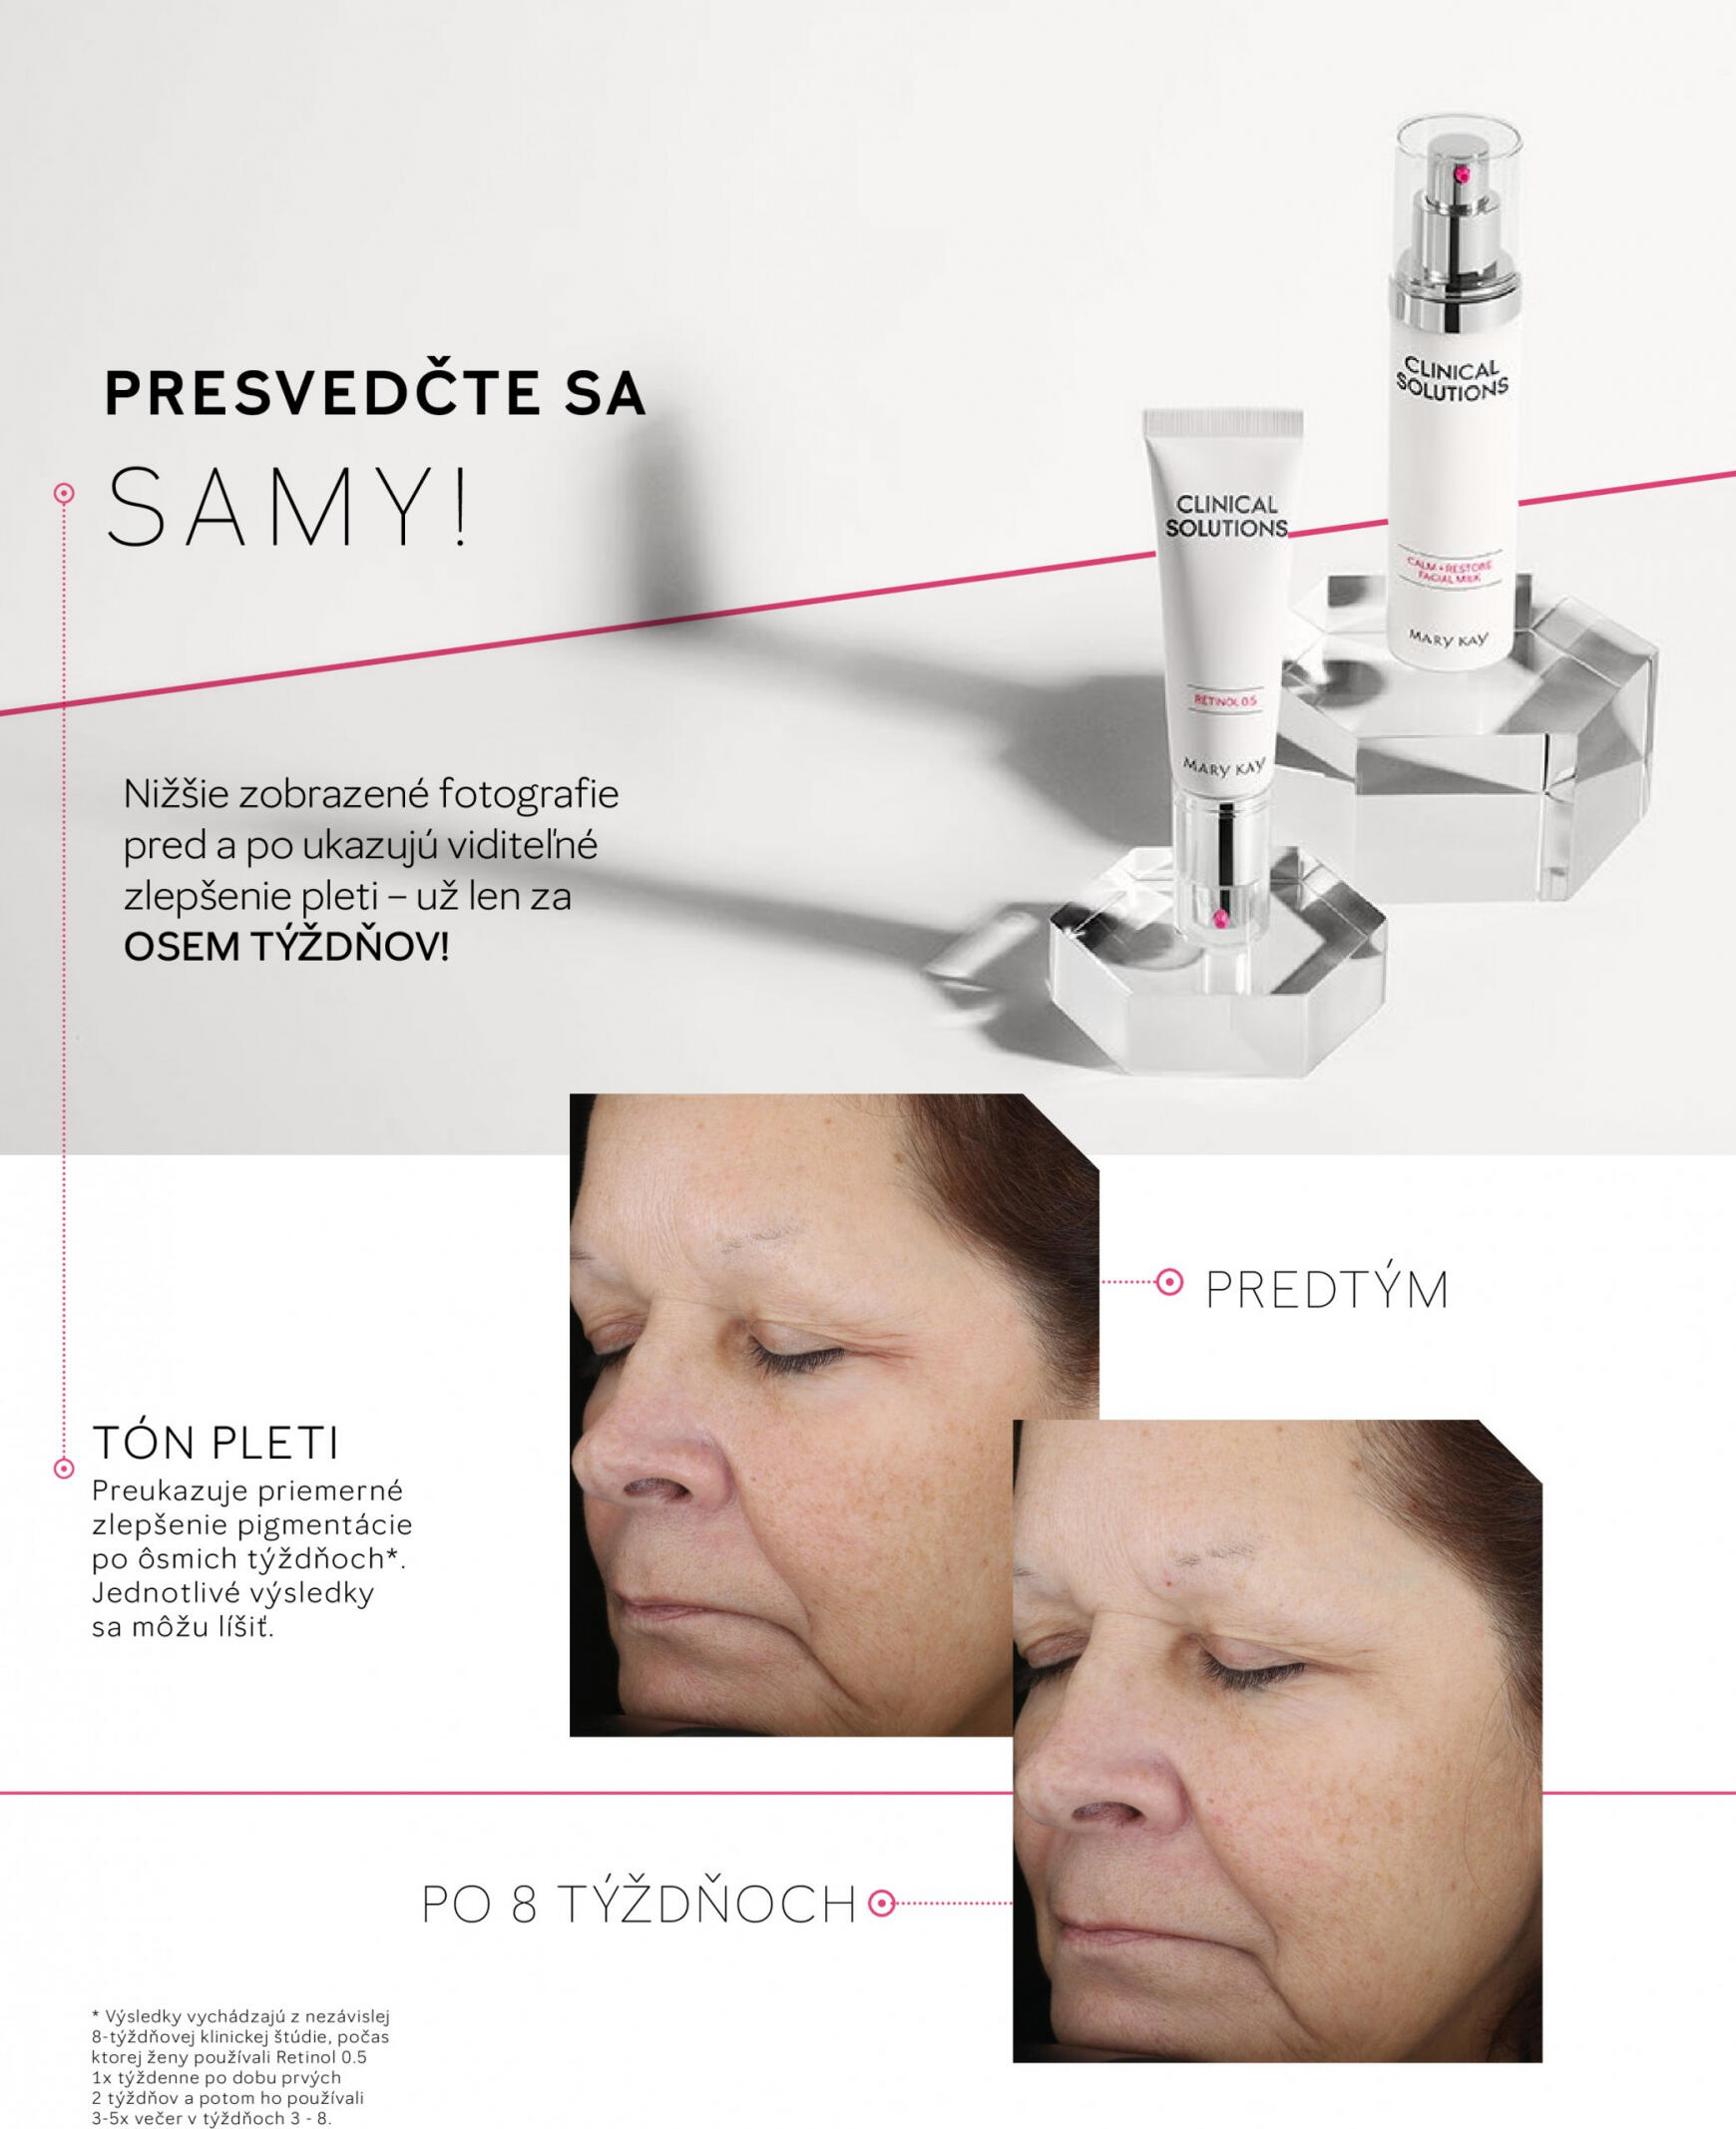 mary-kay - Mary Kay Clinical Solutions® - page: 34